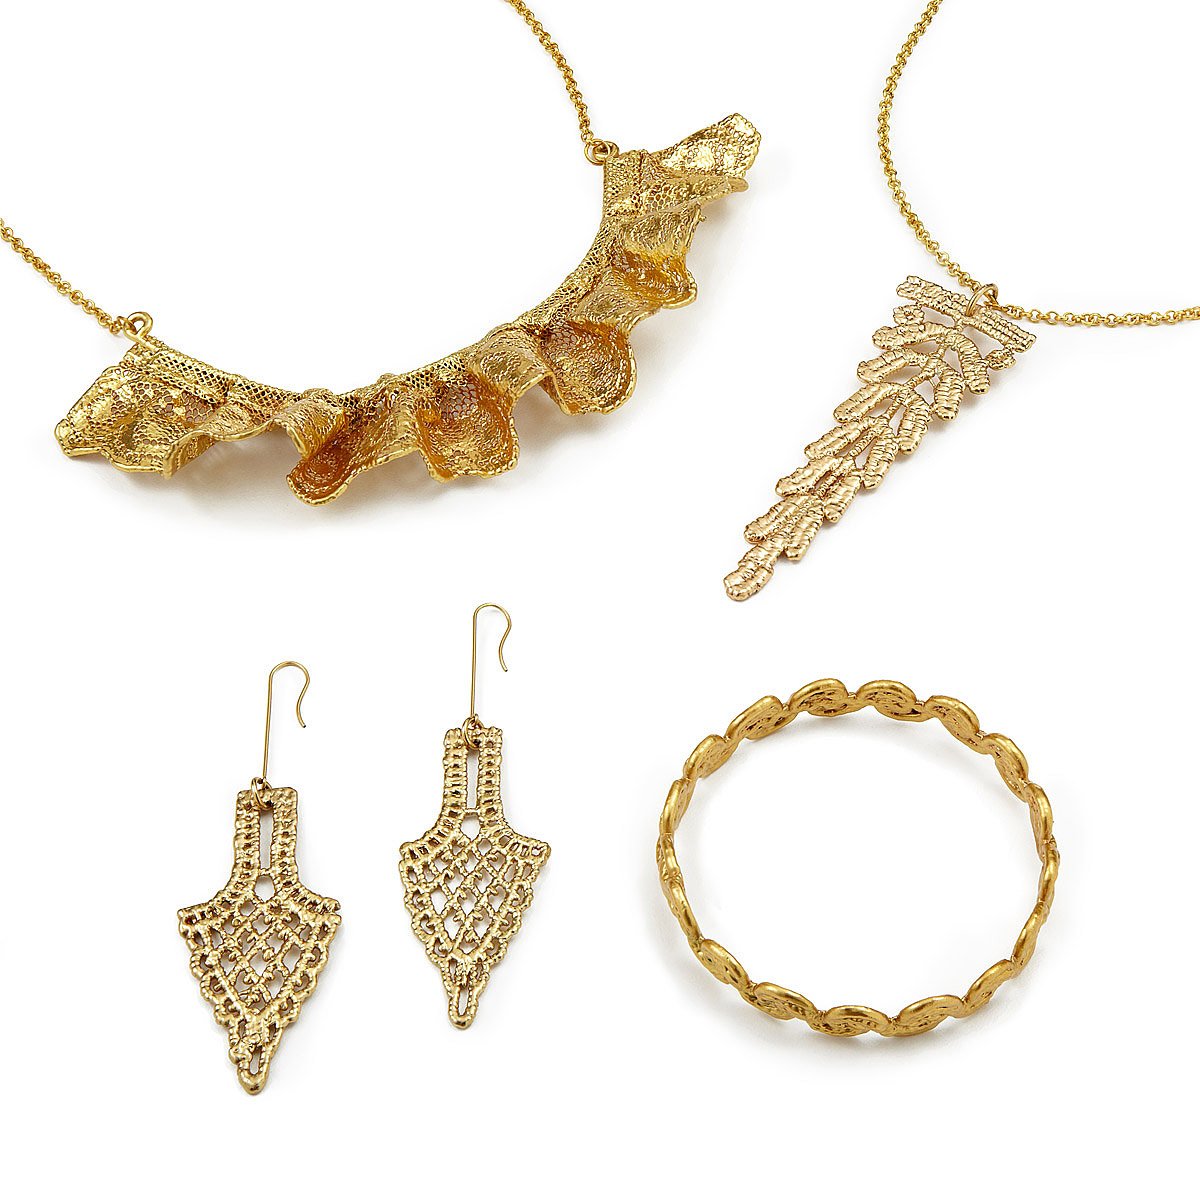 Castillo Gold Dipped Lace Earrings | gilded lace jewelry | UncommonGoods